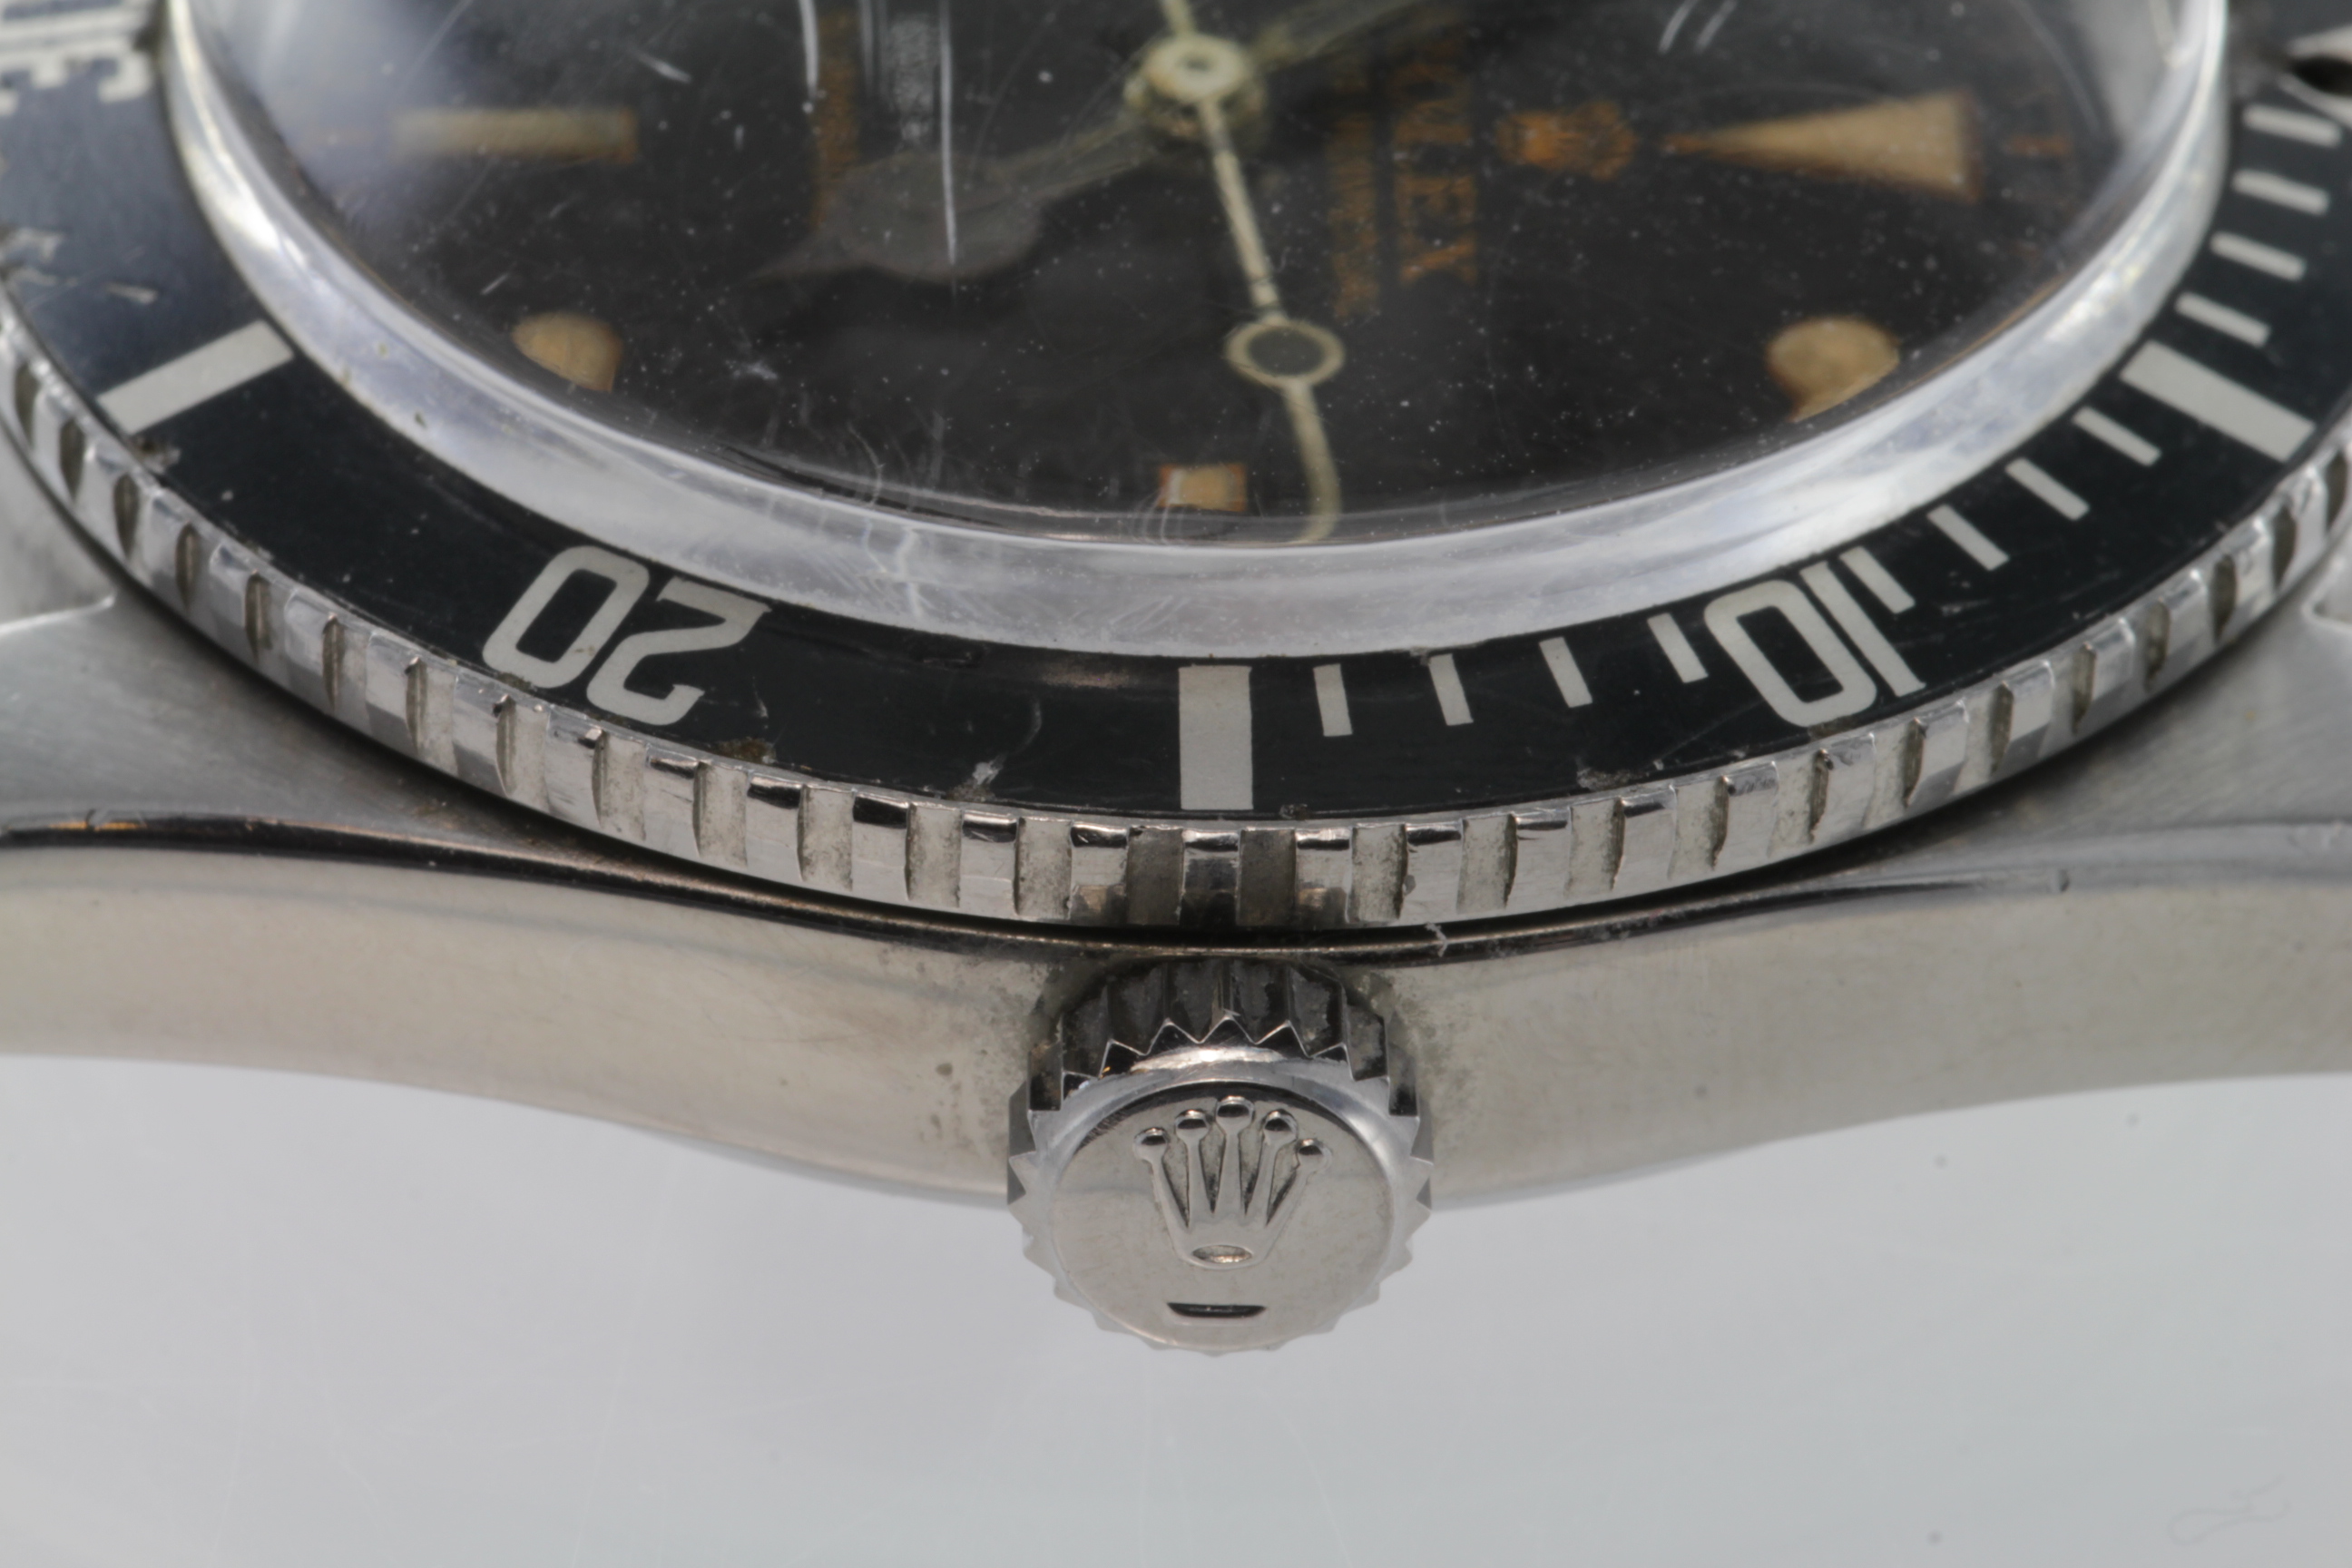 Rolex Oyster Perpetual Submariner 6538/6 (small crown) wristwatch, circa 1956, black dial with - Image 3 of 6